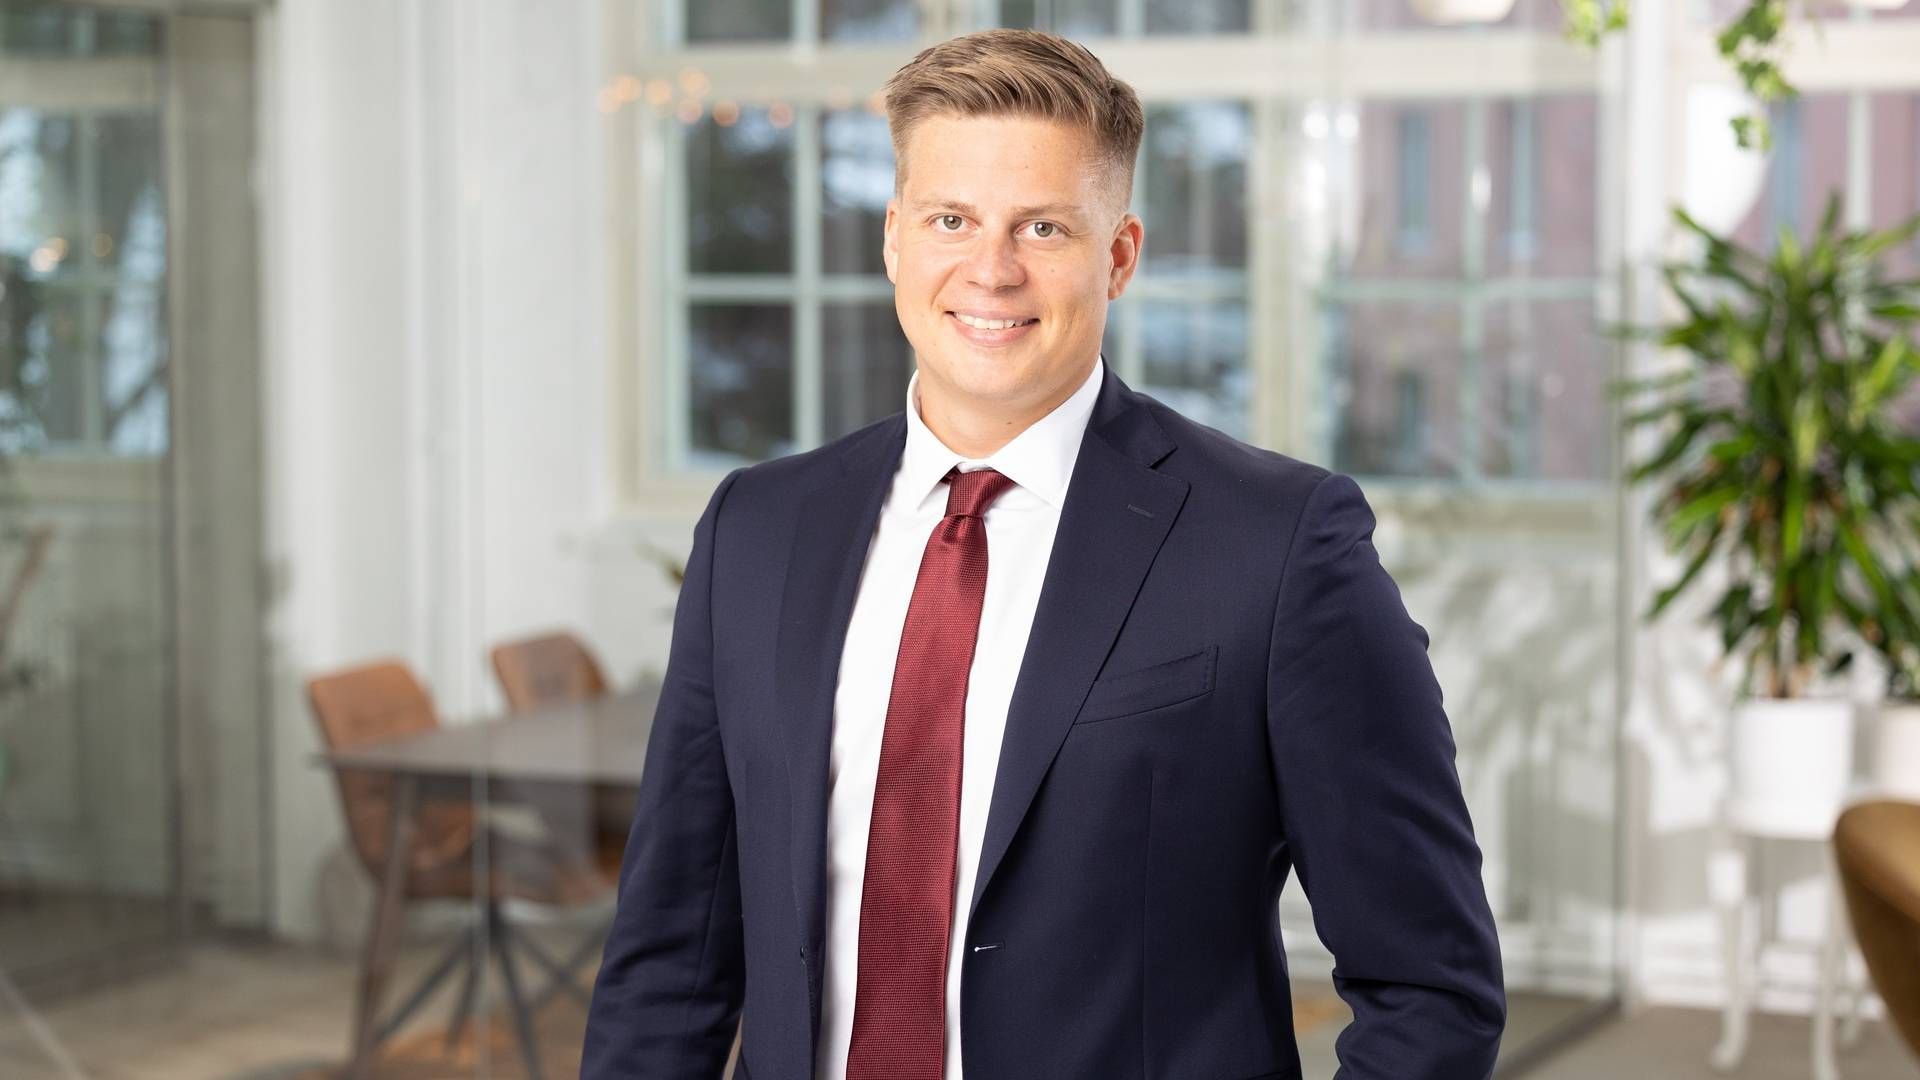 Ronny Högström, newly appointed Manager Client Advisory International at Aquila Capital | Photo: Aquila Capital